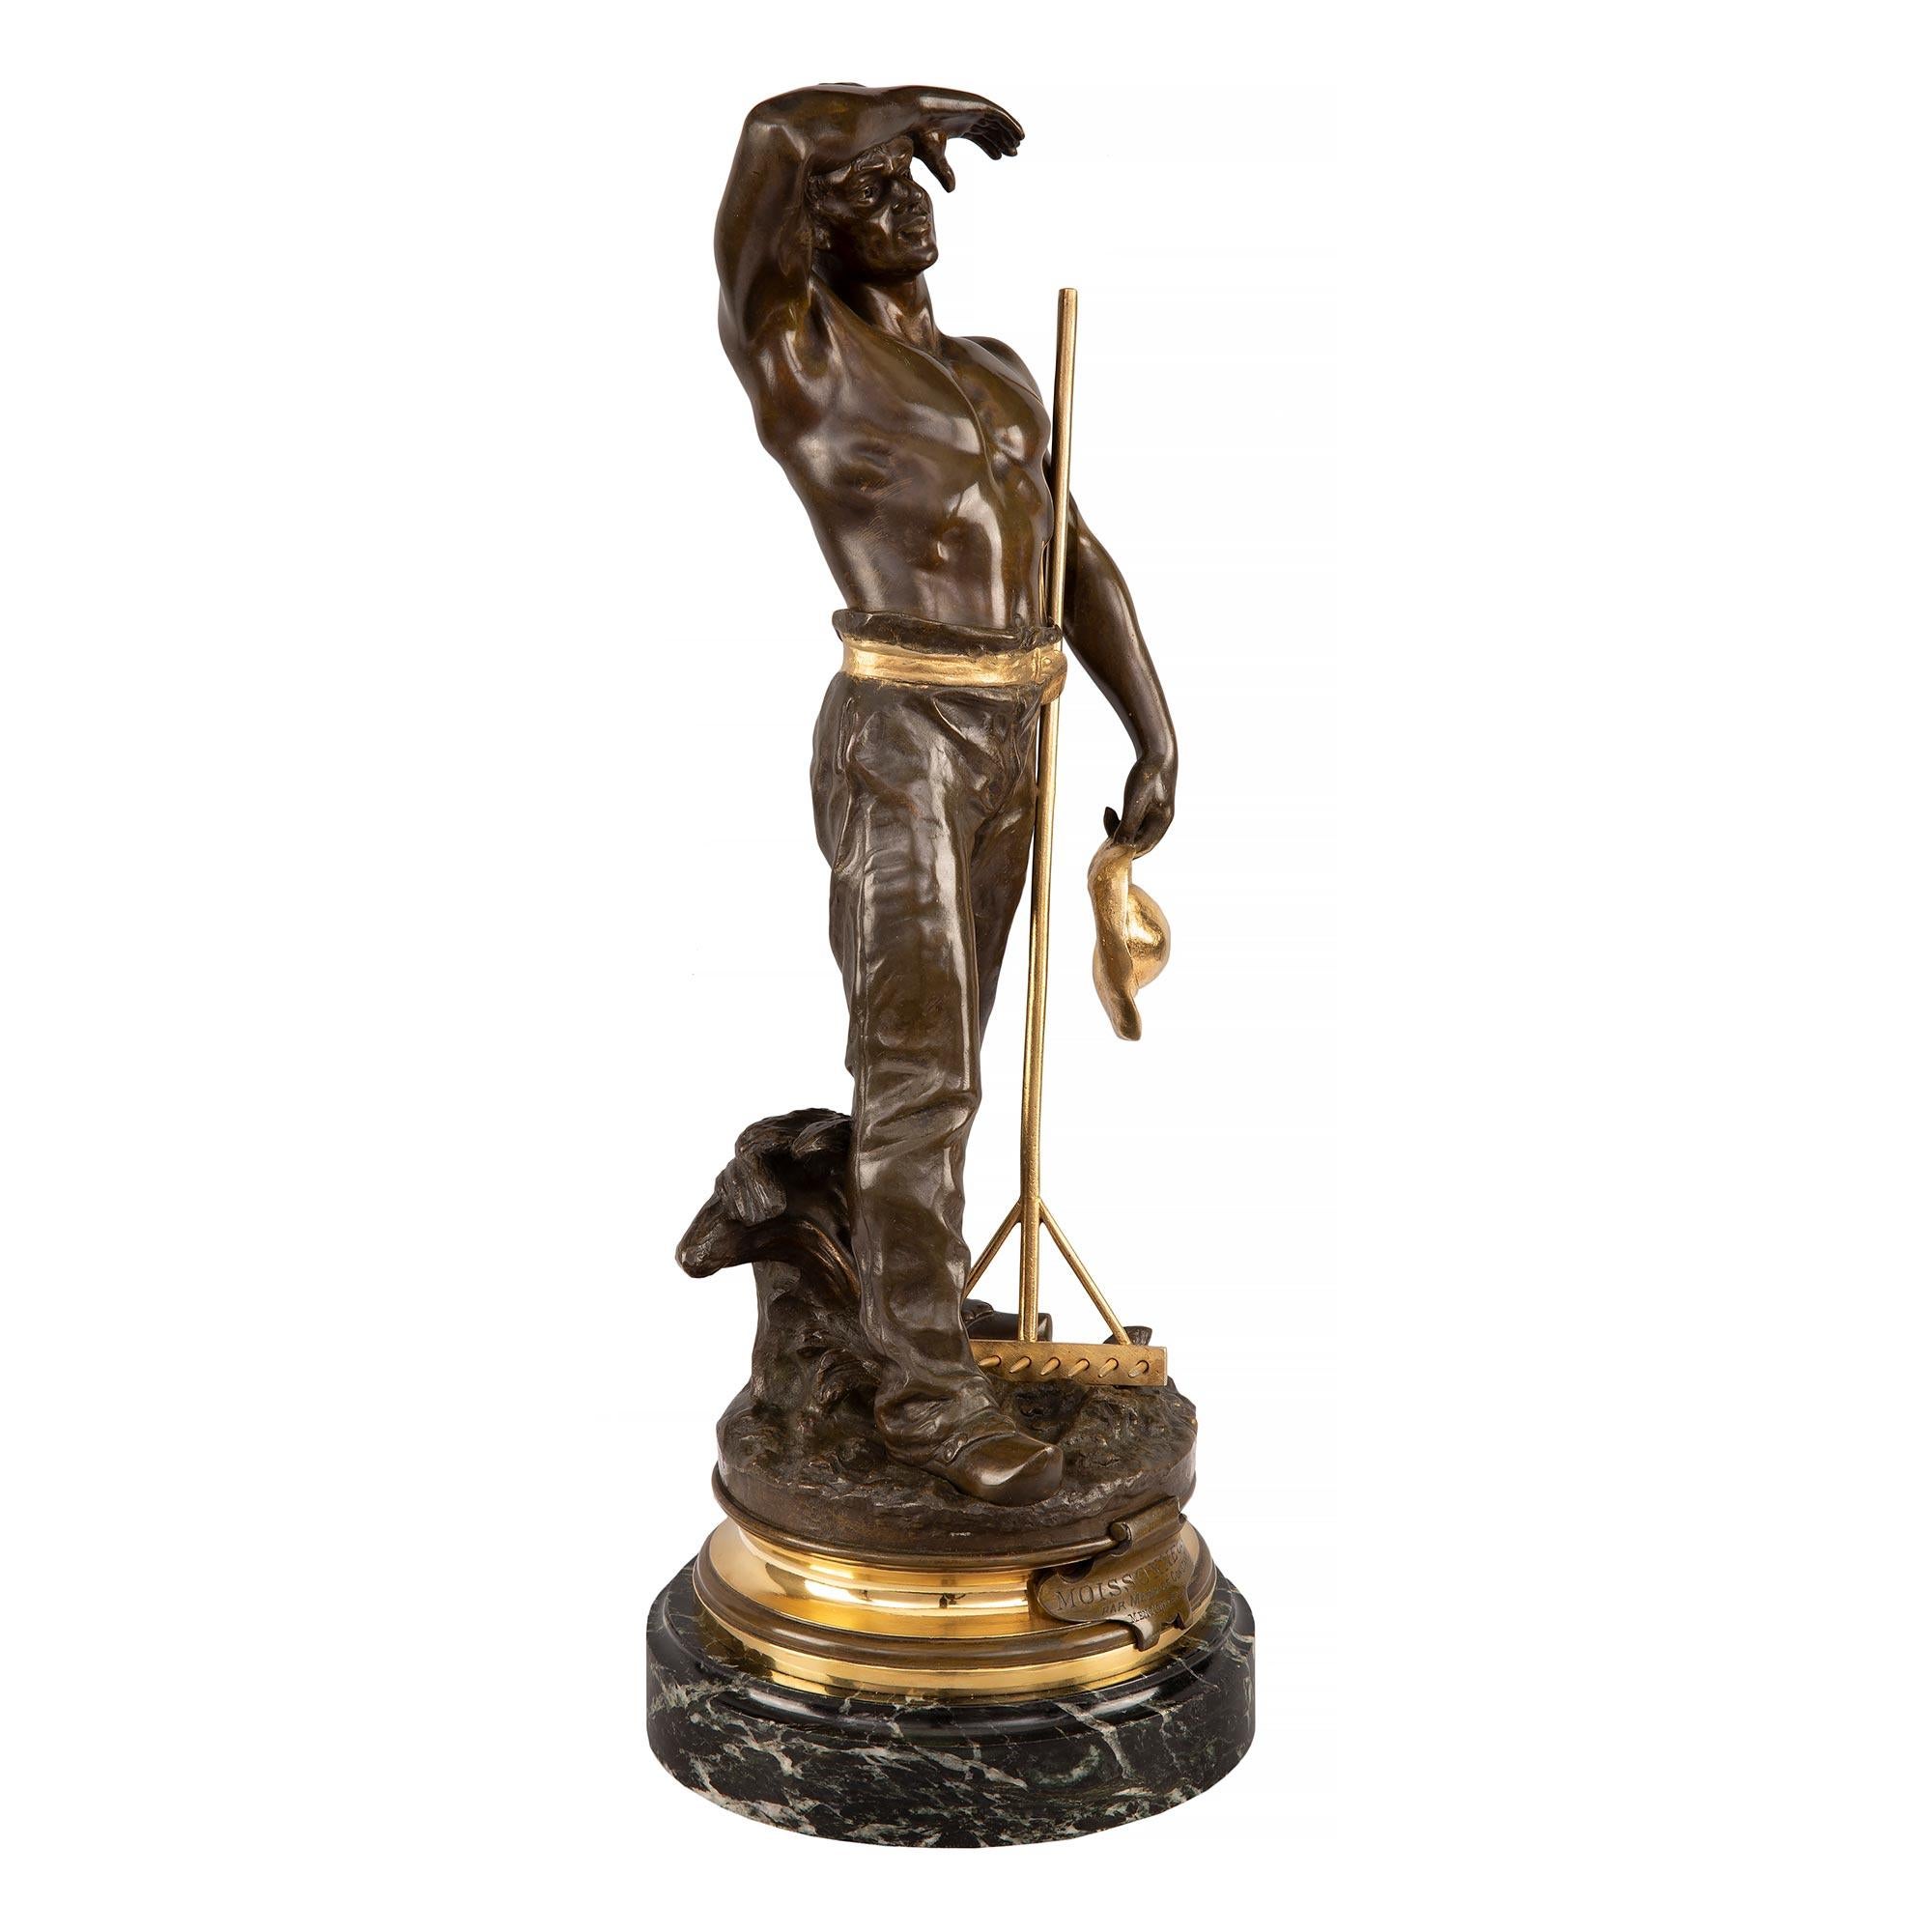 A wonderful French Turn of the Century Louis XVI st. patinated bronze, ormolu and Vert de Patricia marble statue named Moissonneur, by Maurice Constant. The statue is raised by a circular Vert de Patricia marble base with a fine mottled border. The